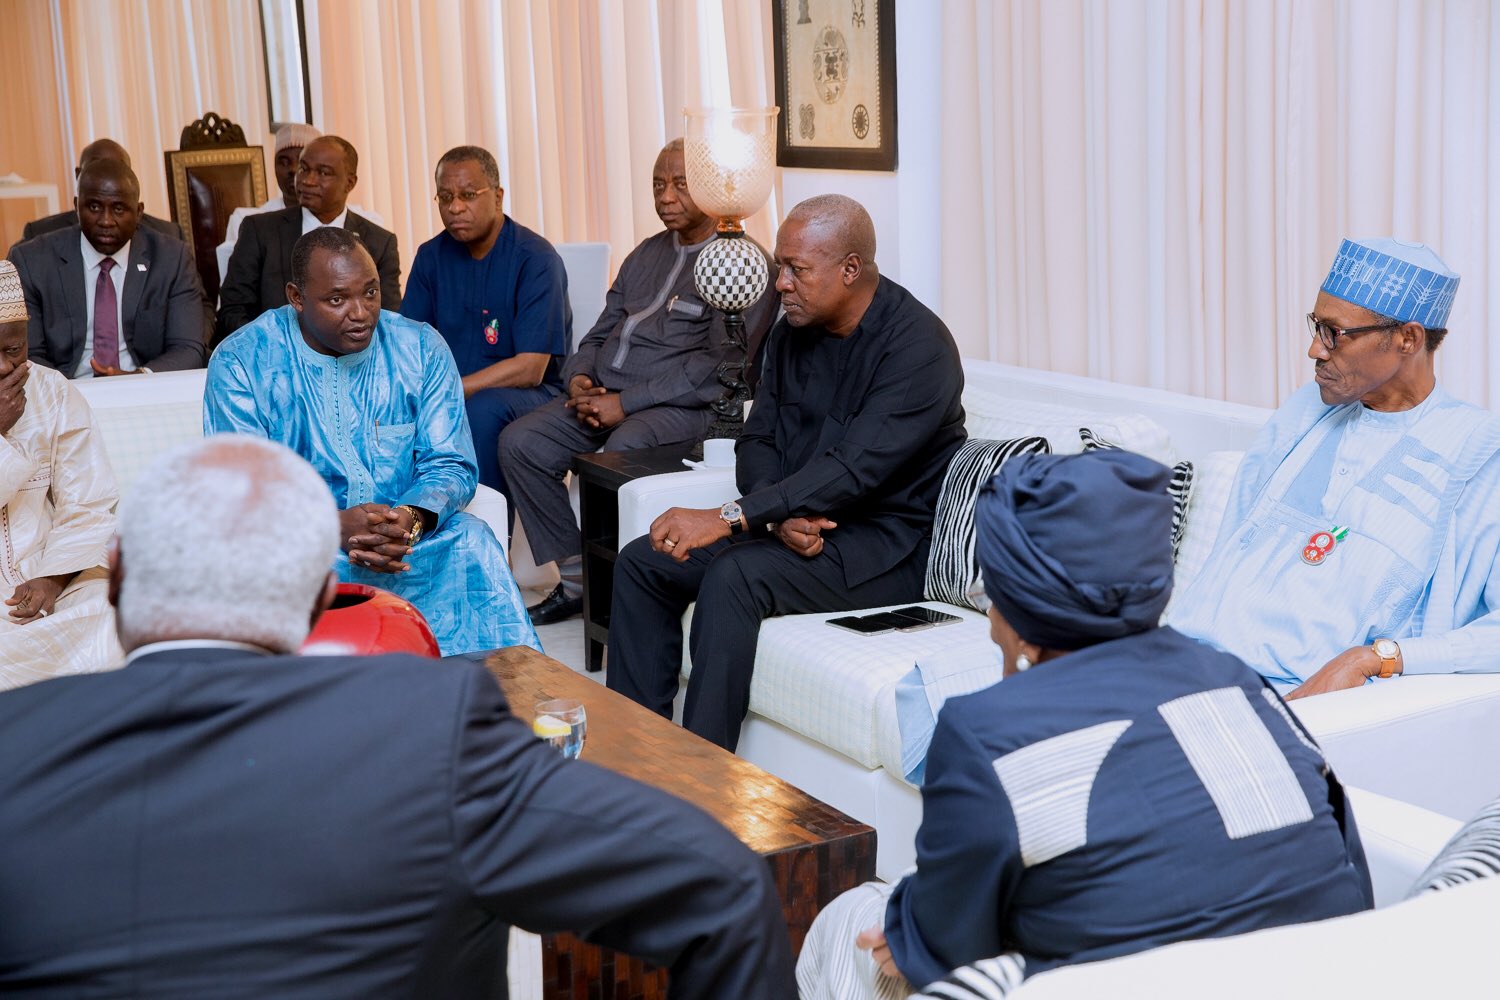 Pres. Ellen Johnson Sirleaf and other ECOWAS leaders meet with the winner of the Gambian election, Adamma Barrow. Photo: Federal Republic of Nigeria/Twitter